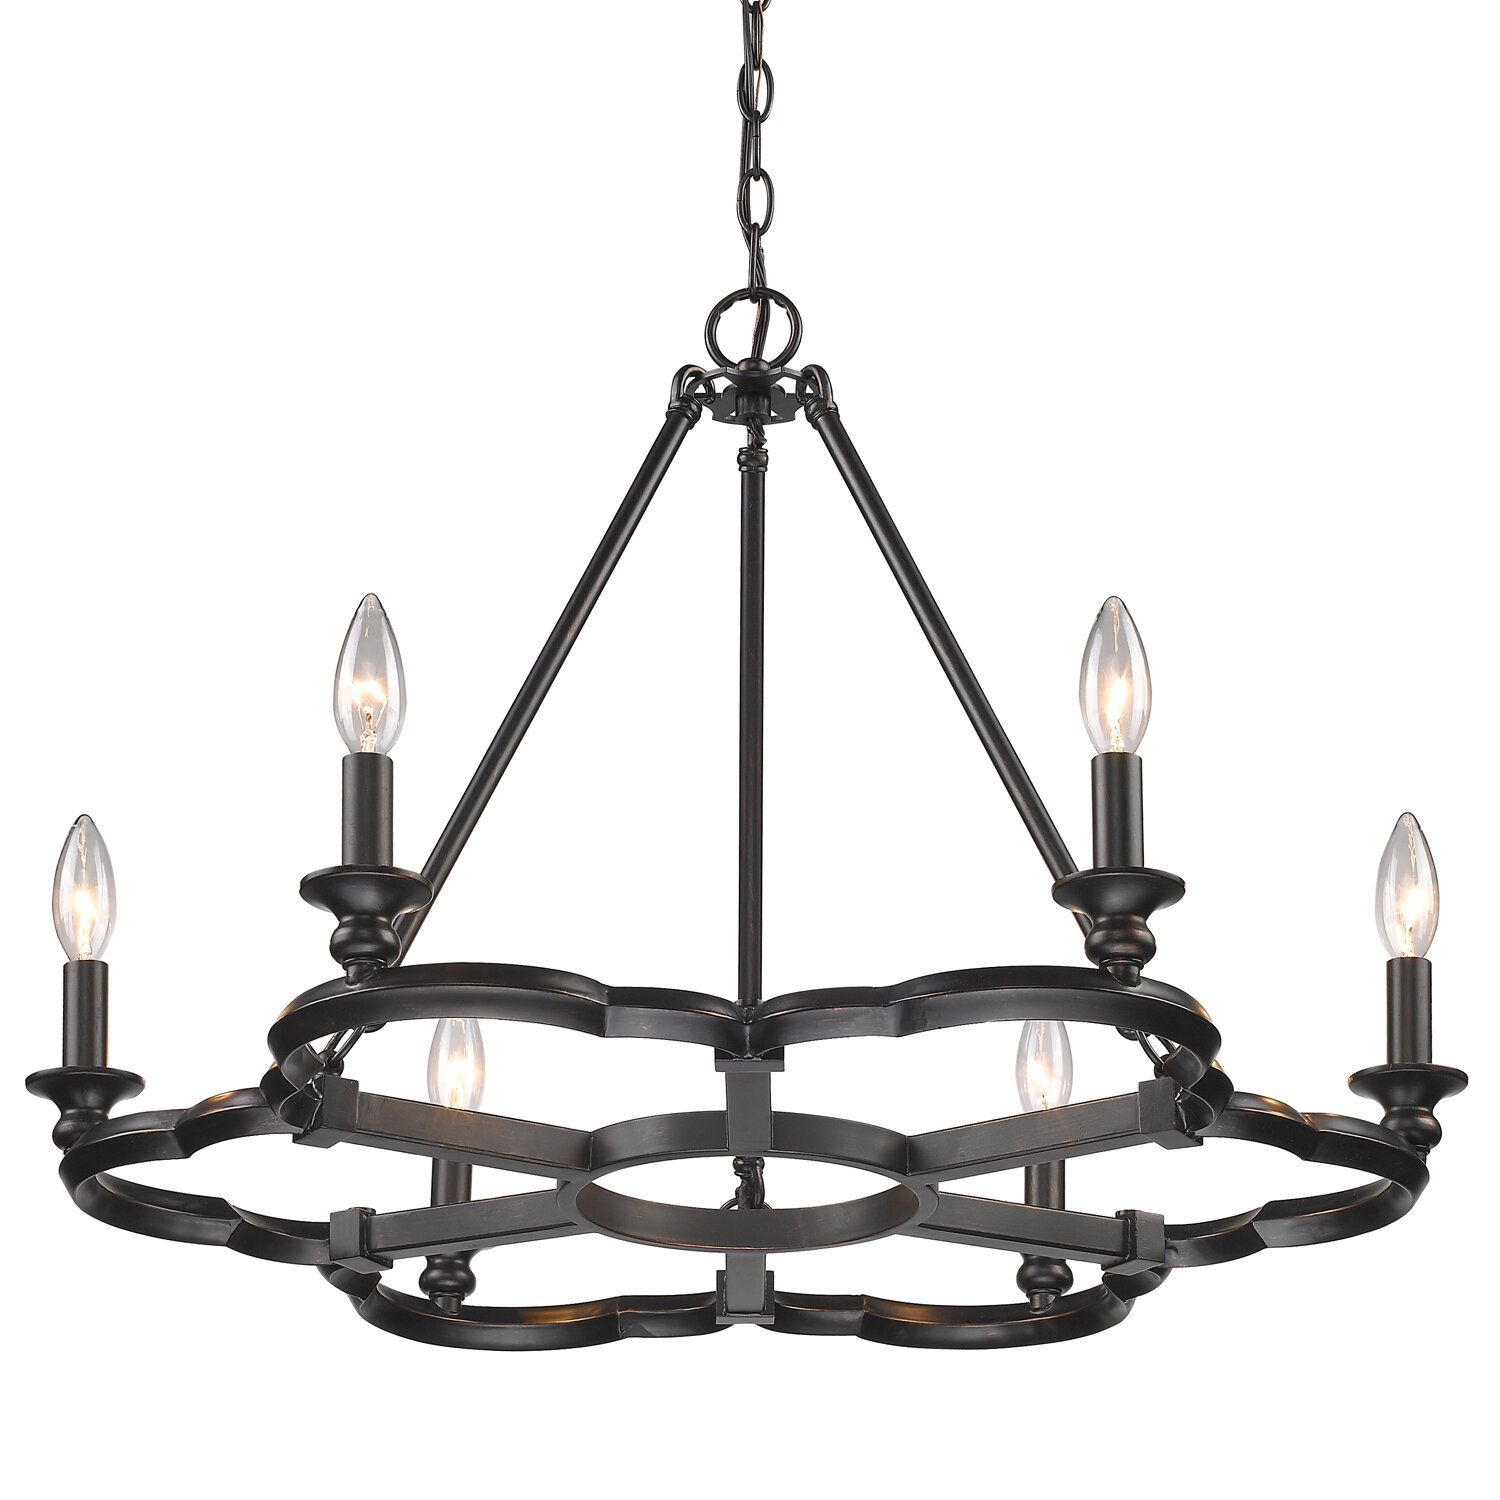 Stephania 6 Light Candle Style Chandelier Regarding Perseus 6 Light Candle Style Chandeliers (View 6 of 30)